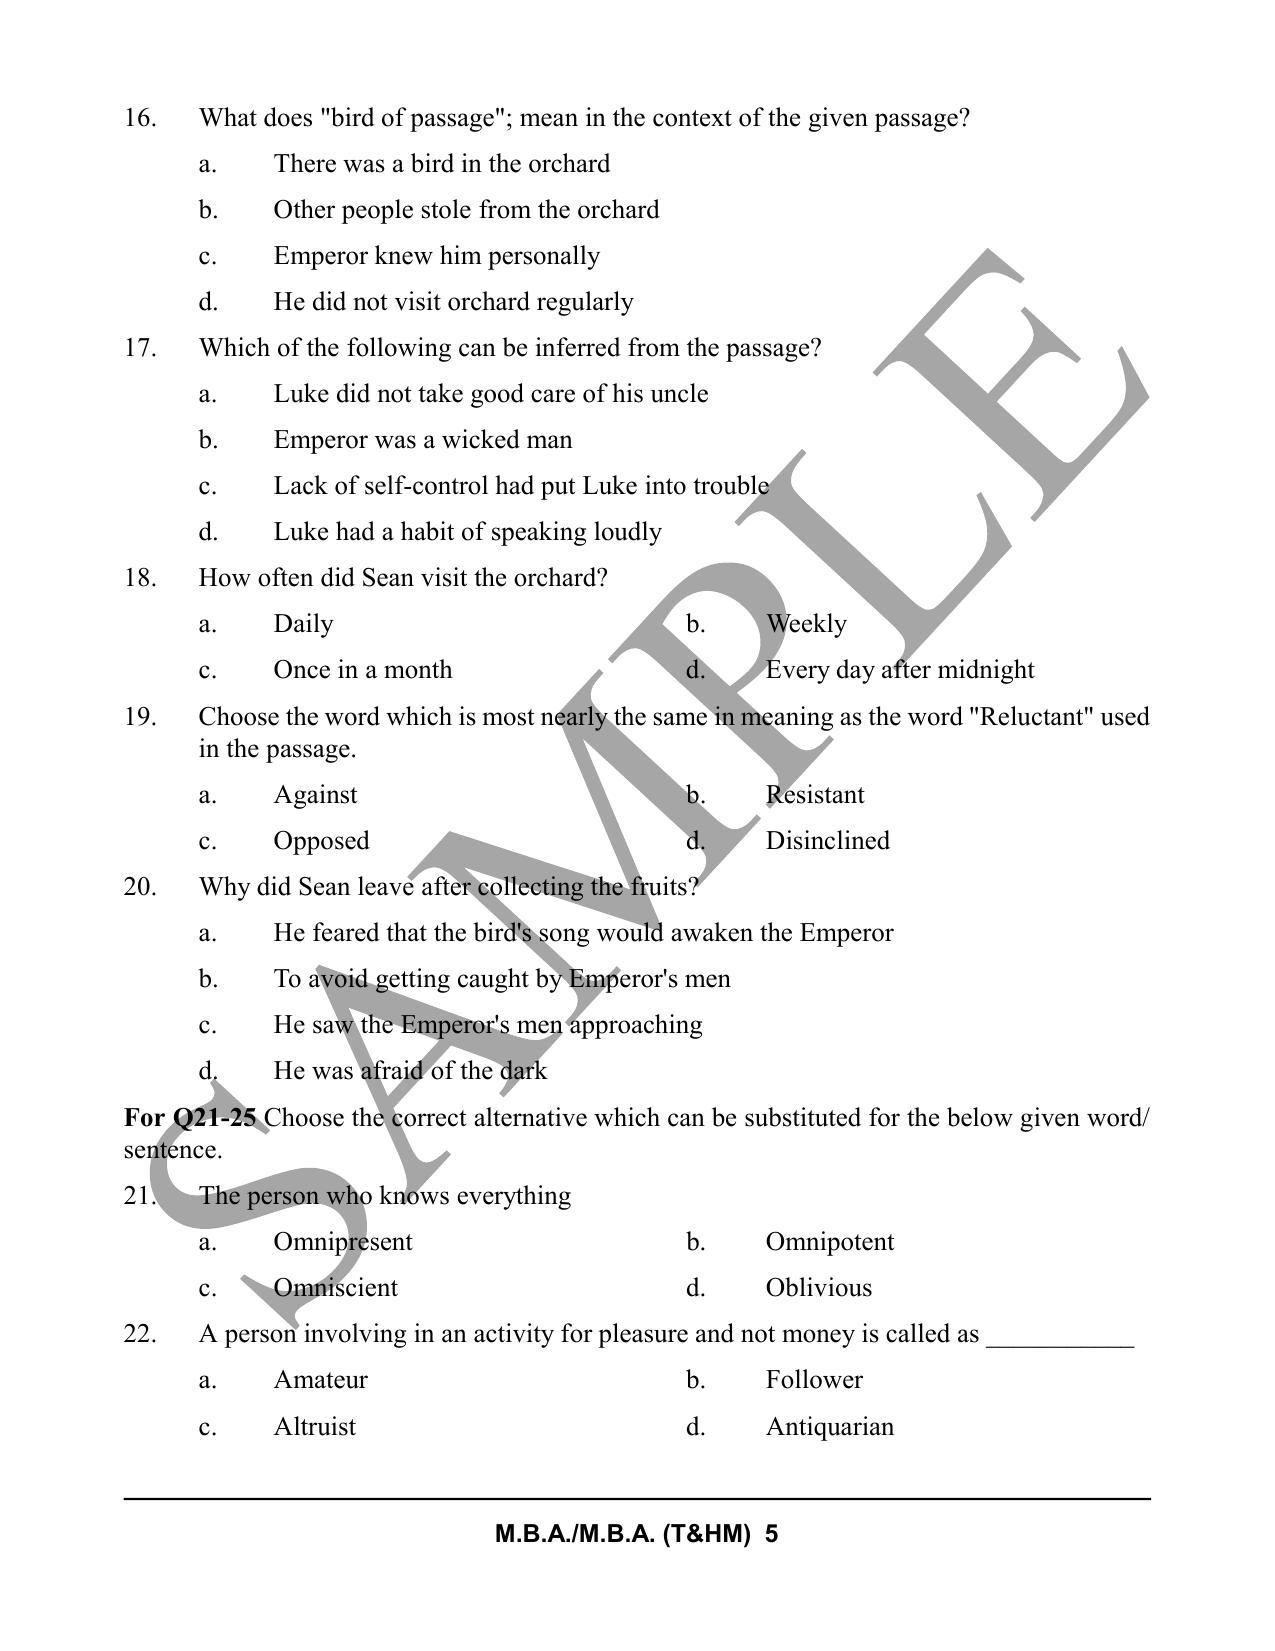 HPCET MBA and MBA (T&HM) Sample Paper 2023 Sample Paper - Page 5